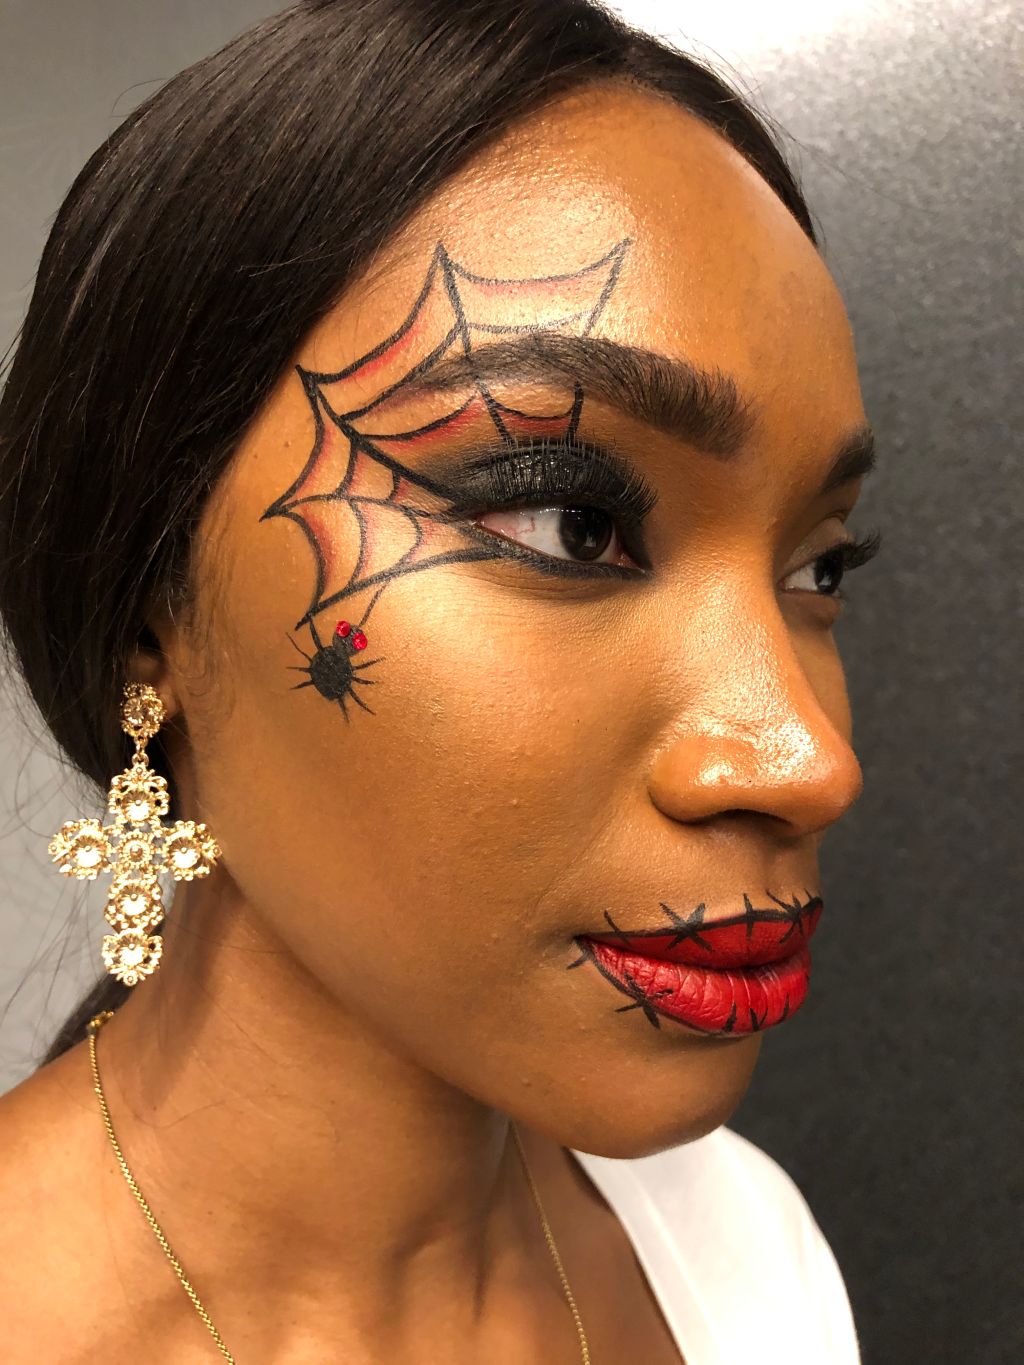 Pond's Halloween Makeup with Glamsquad